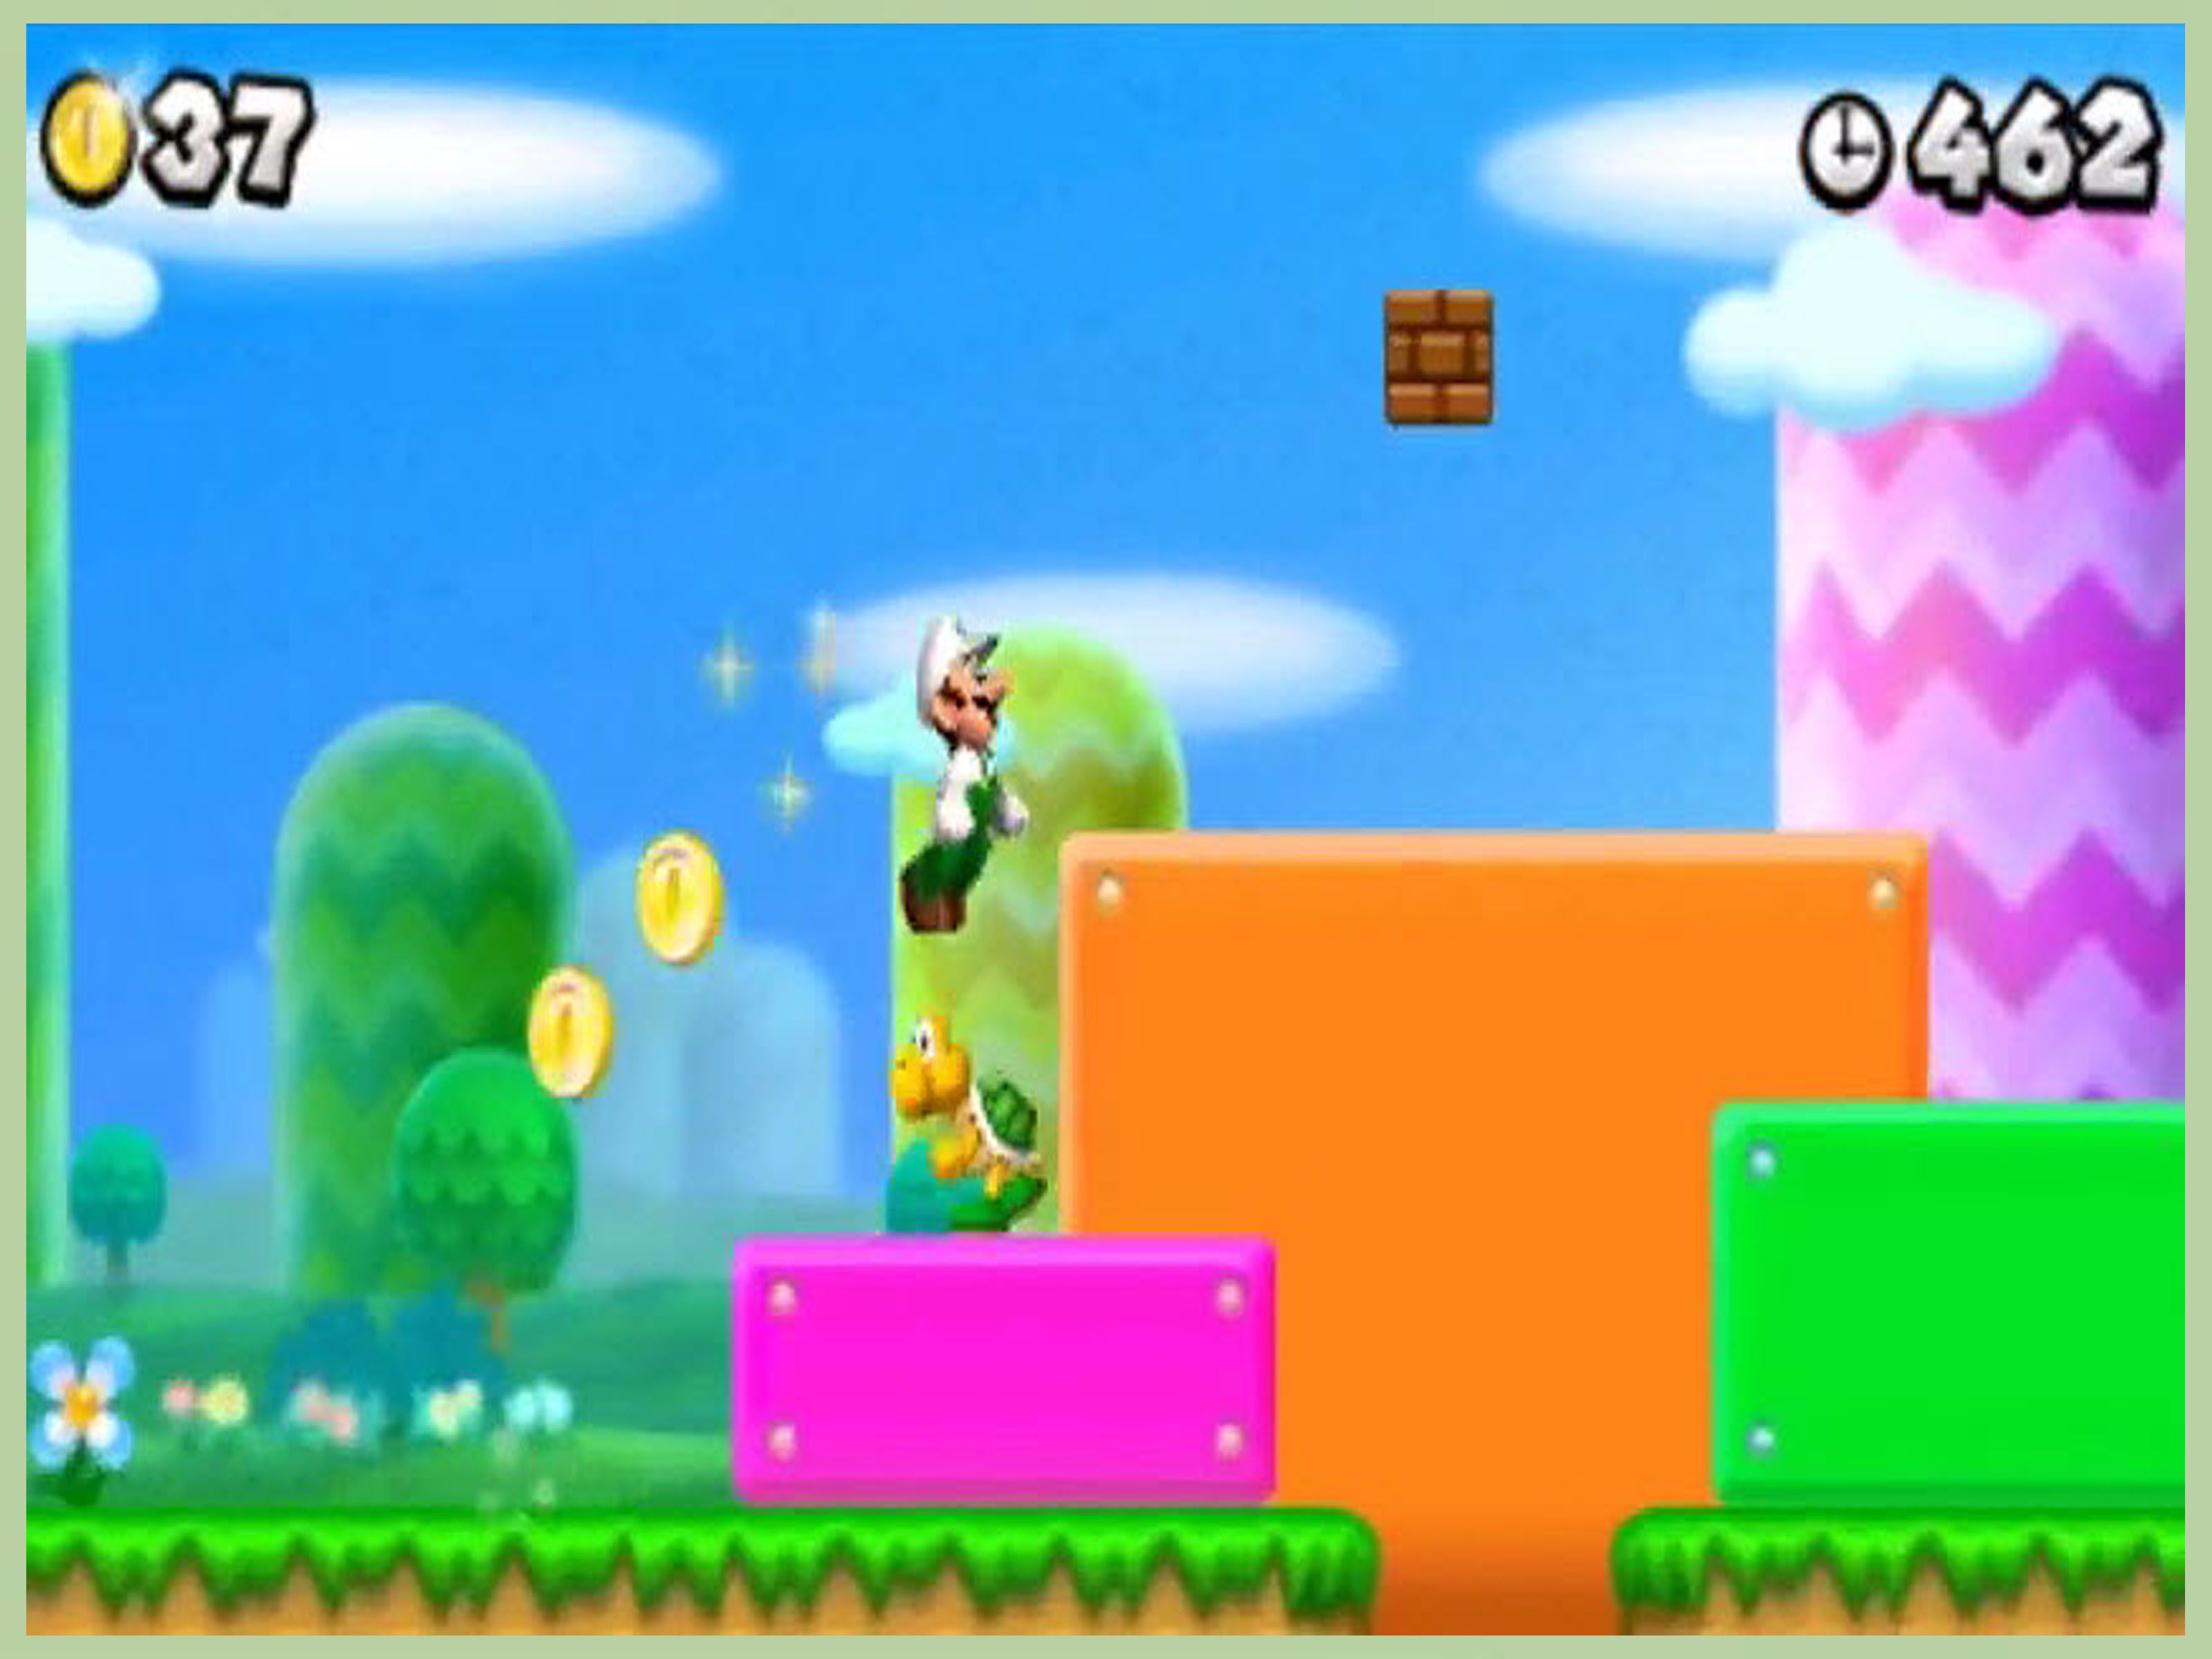 How to Play Super Mario Bros: 6 Steps (with Pictures) - wikiHow